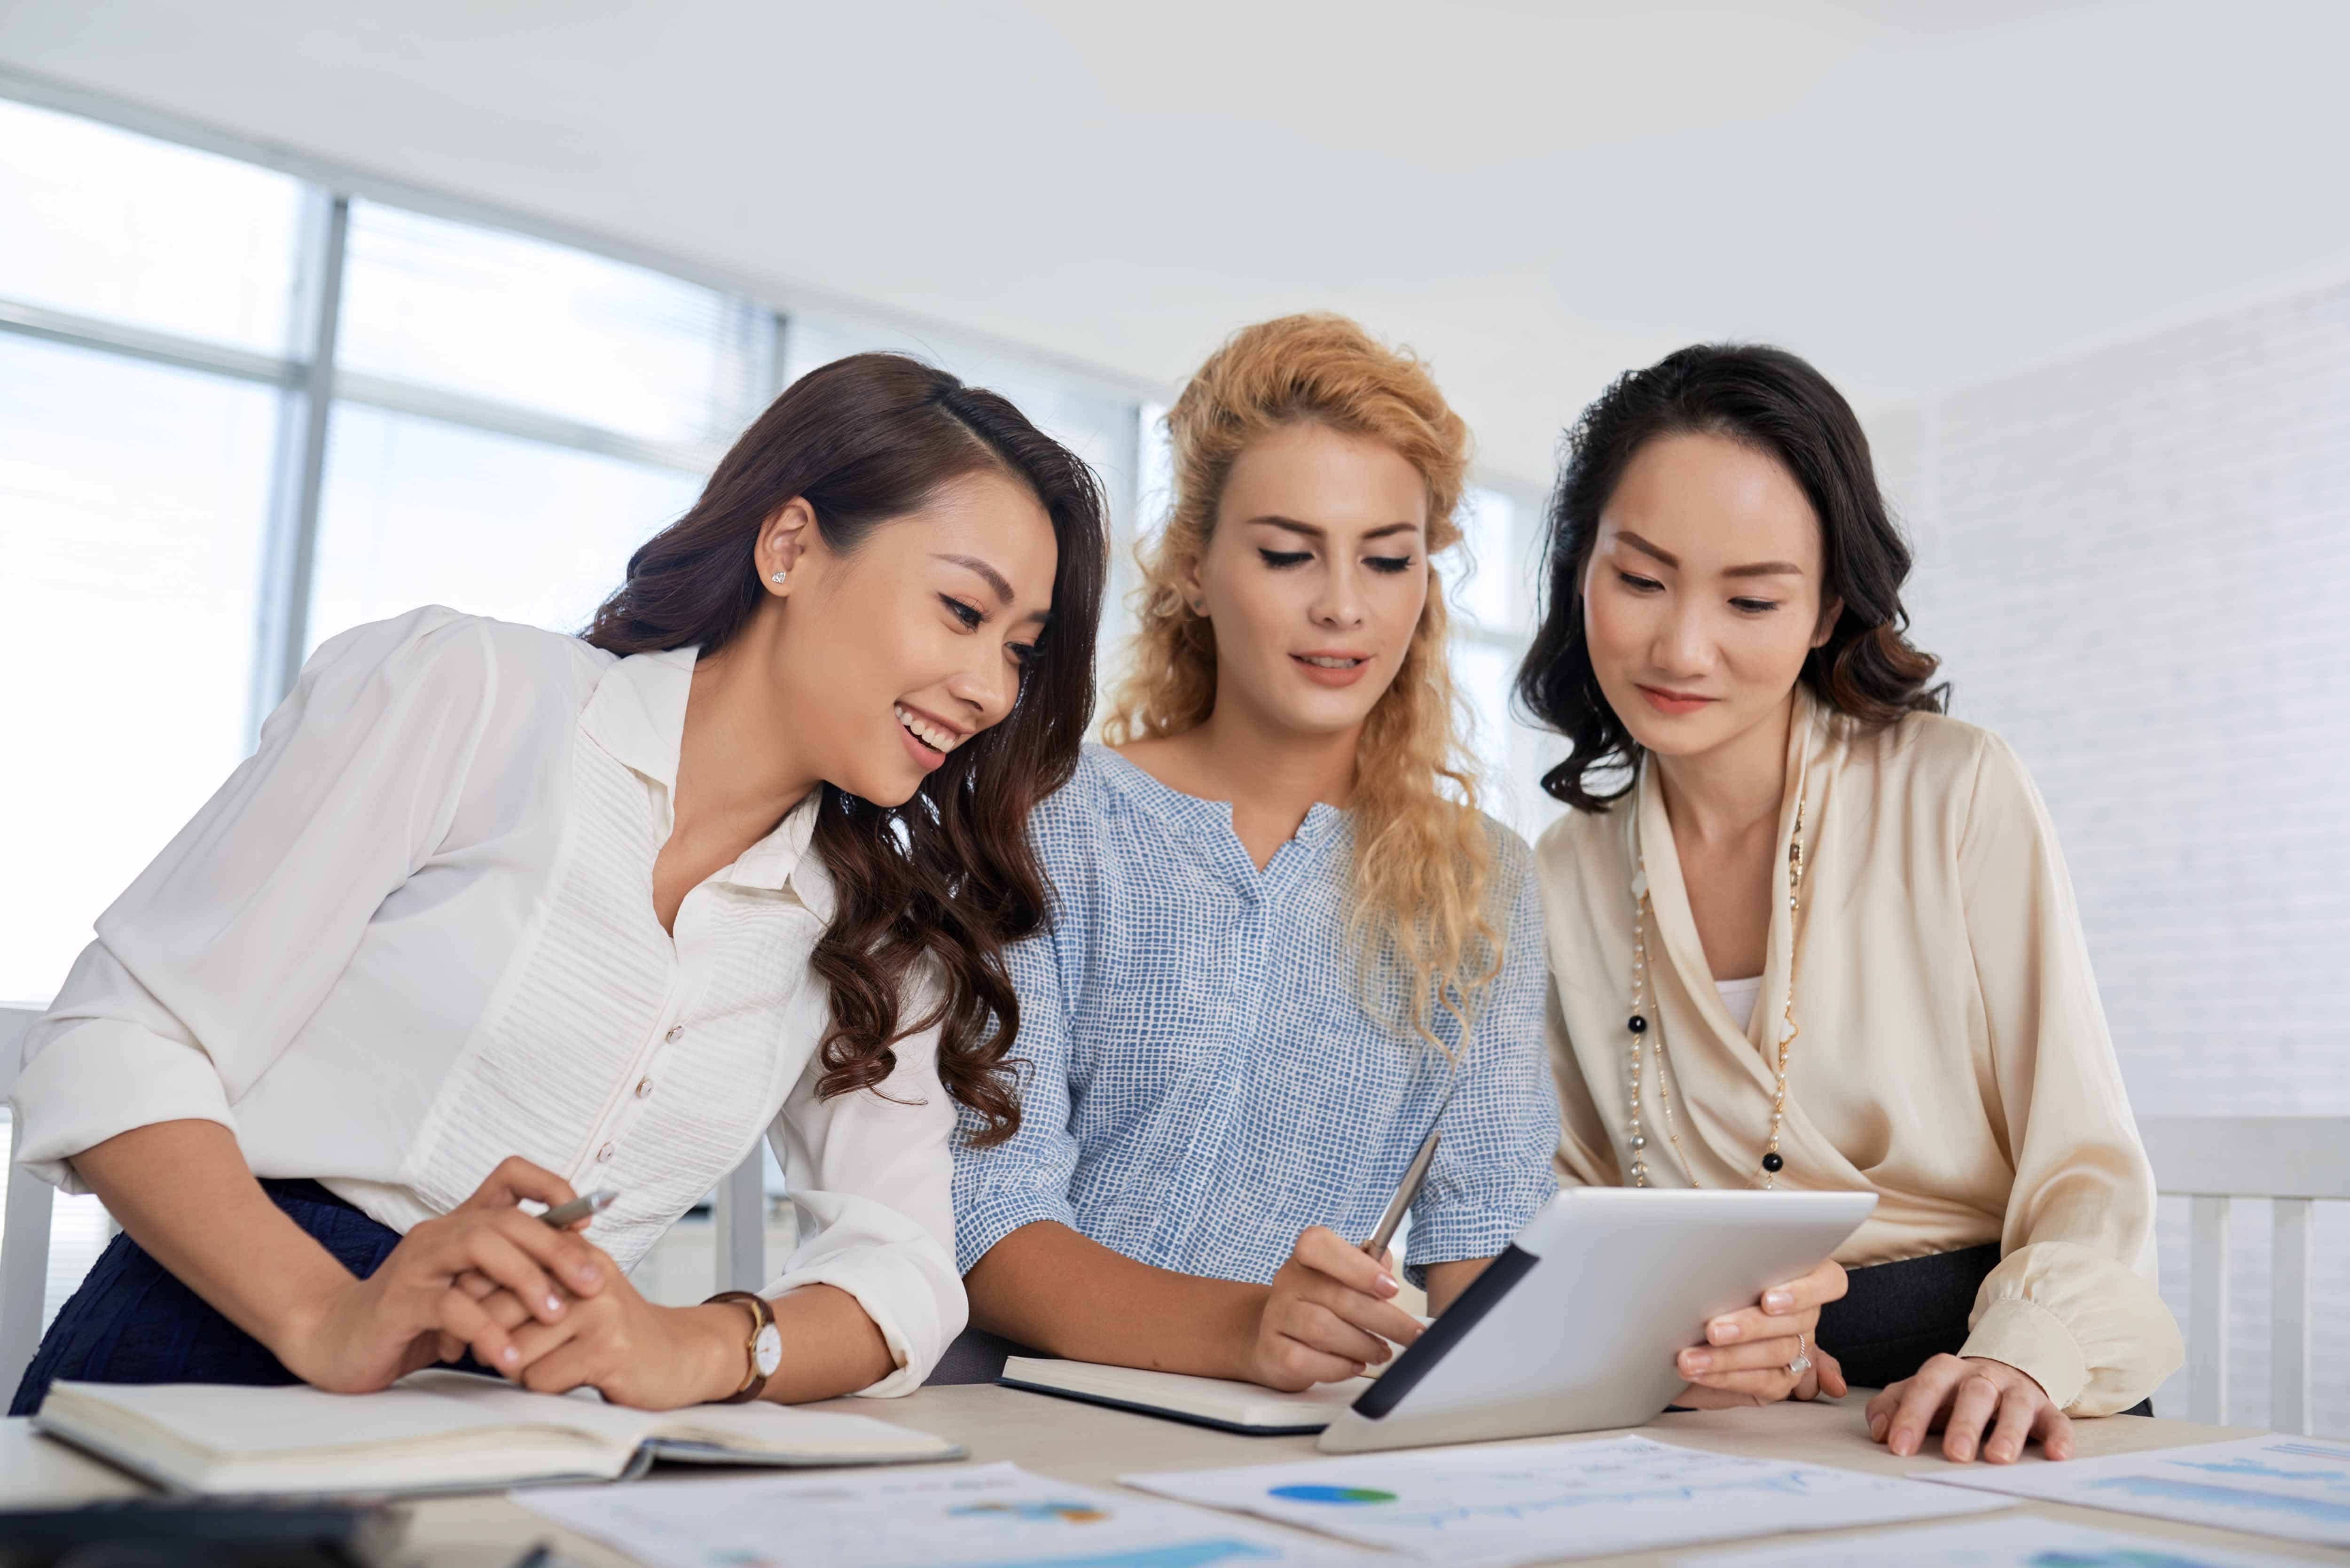 Multi-ethnic team of business women analyzing information on tablet computer